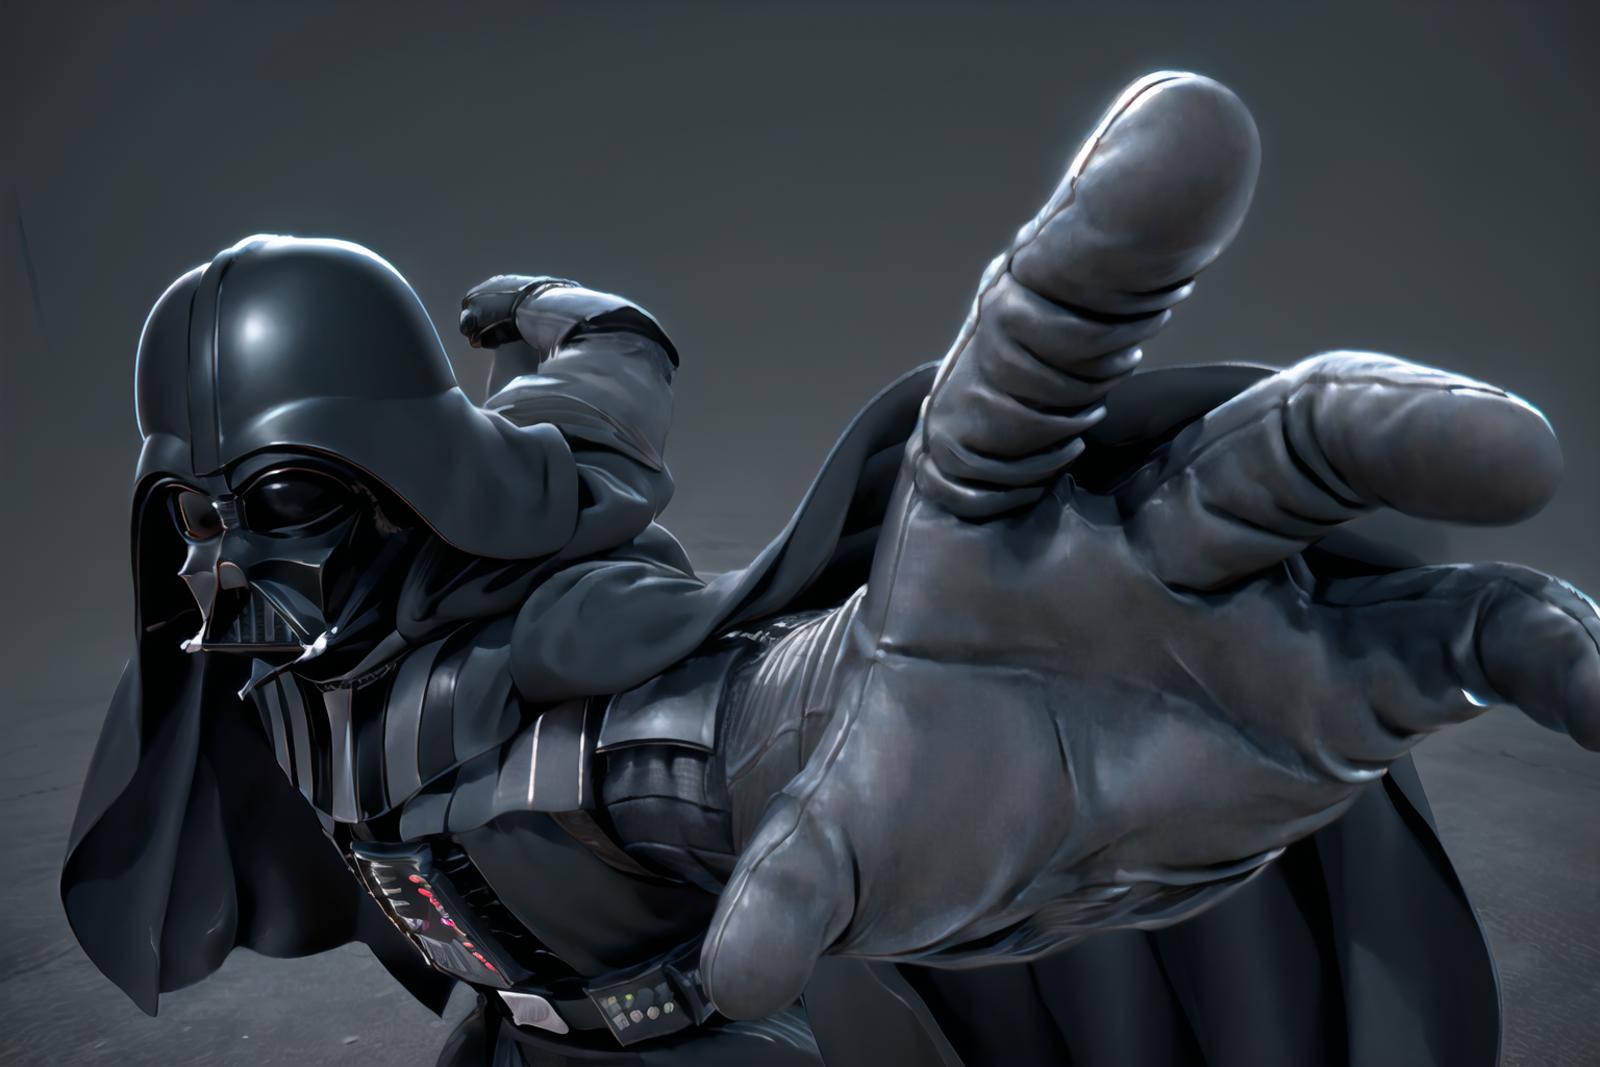 A CGI Darth Vader with his arm outstretched.